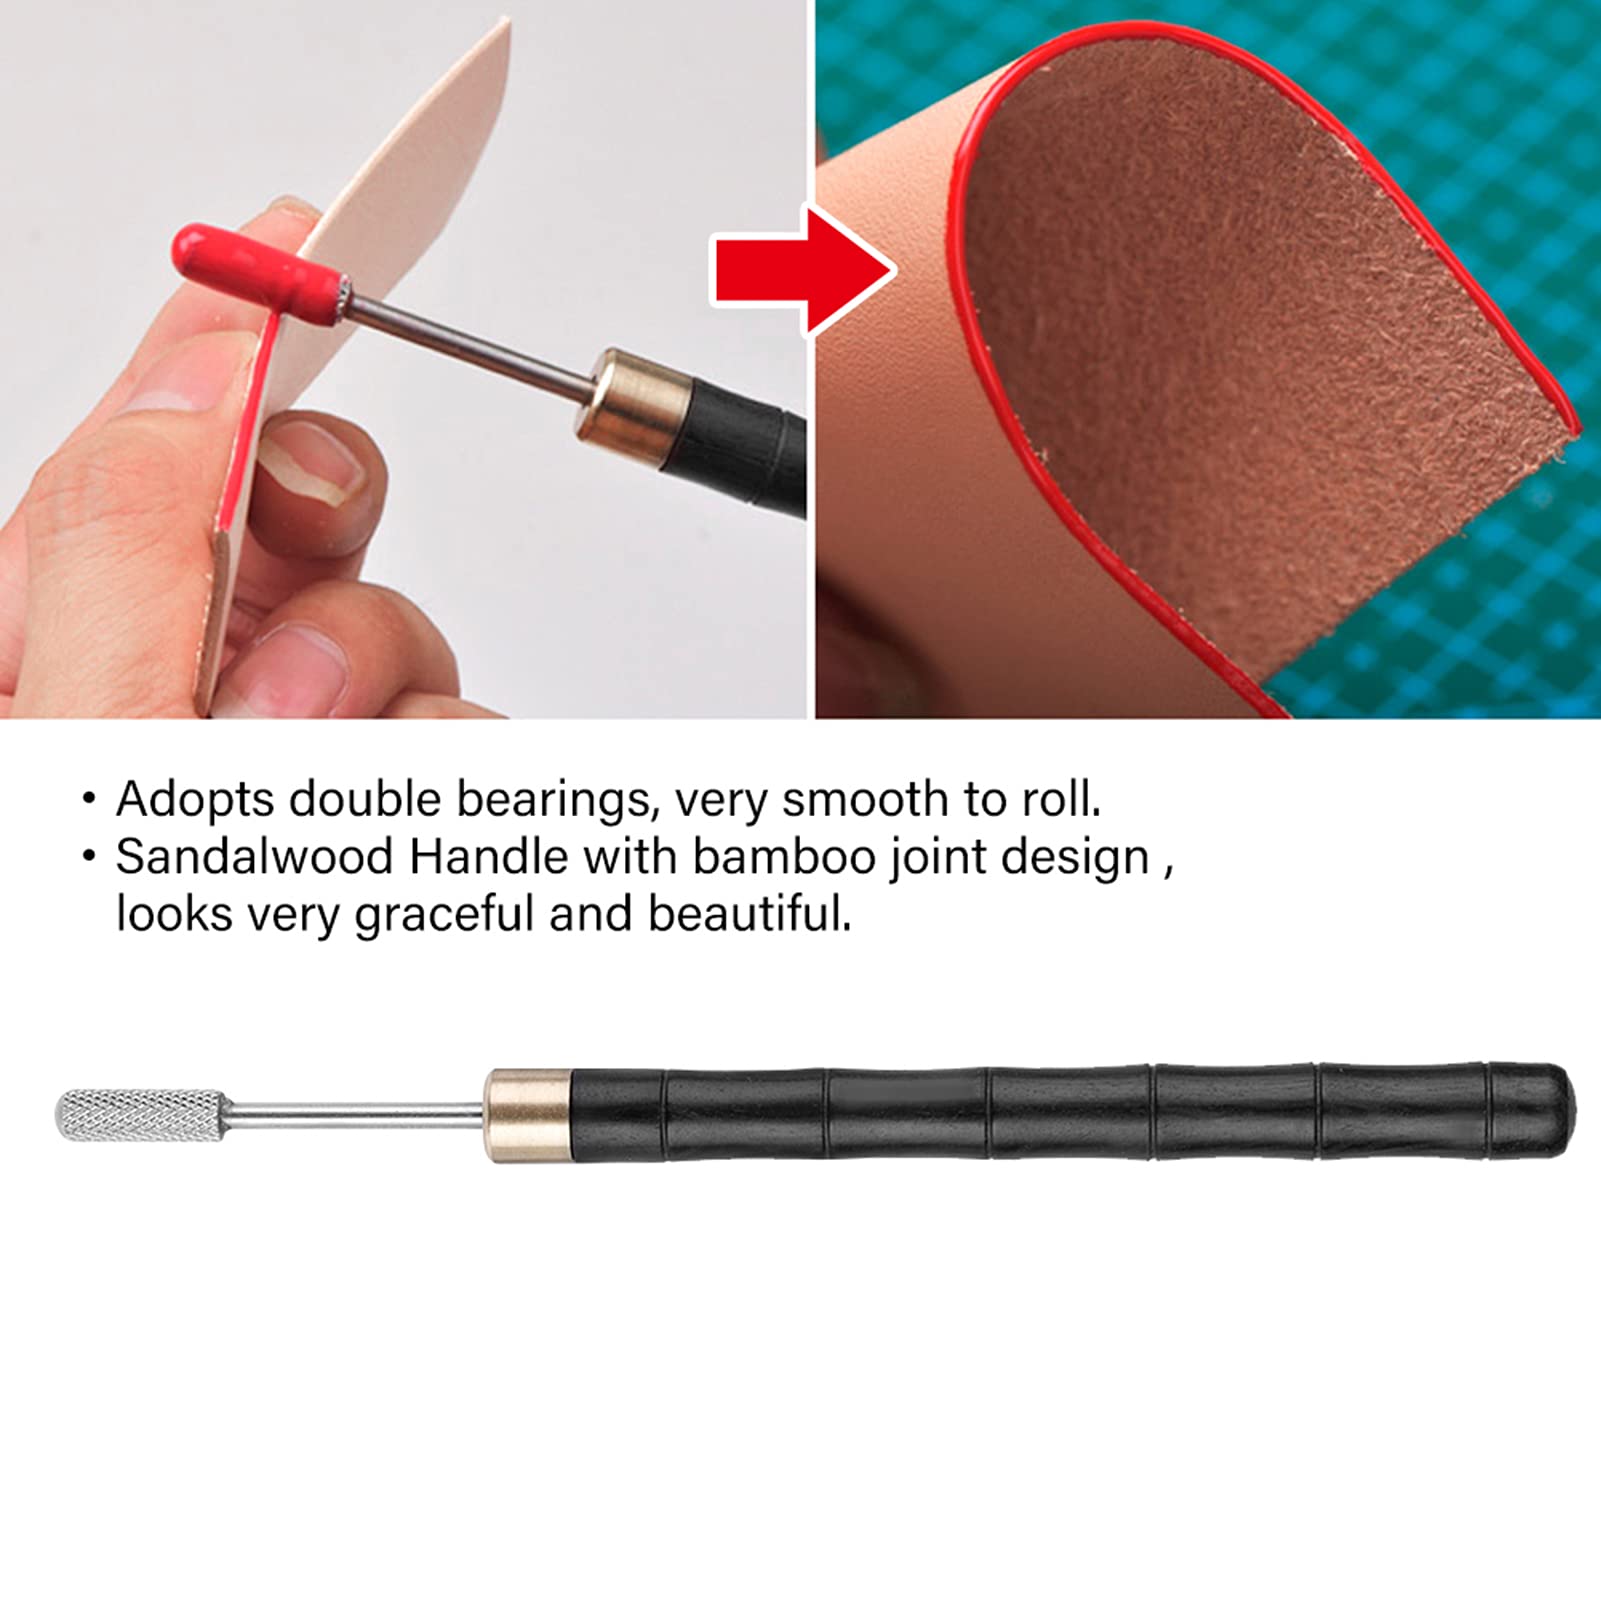 Leather Edge Dye Pen, Leather Craft Dye Pen Oil Paint Roller Applicator, Leather Edge Printing Tool, Stainless Steel Top Edge Dye Roller for Leather Craft DIY Working